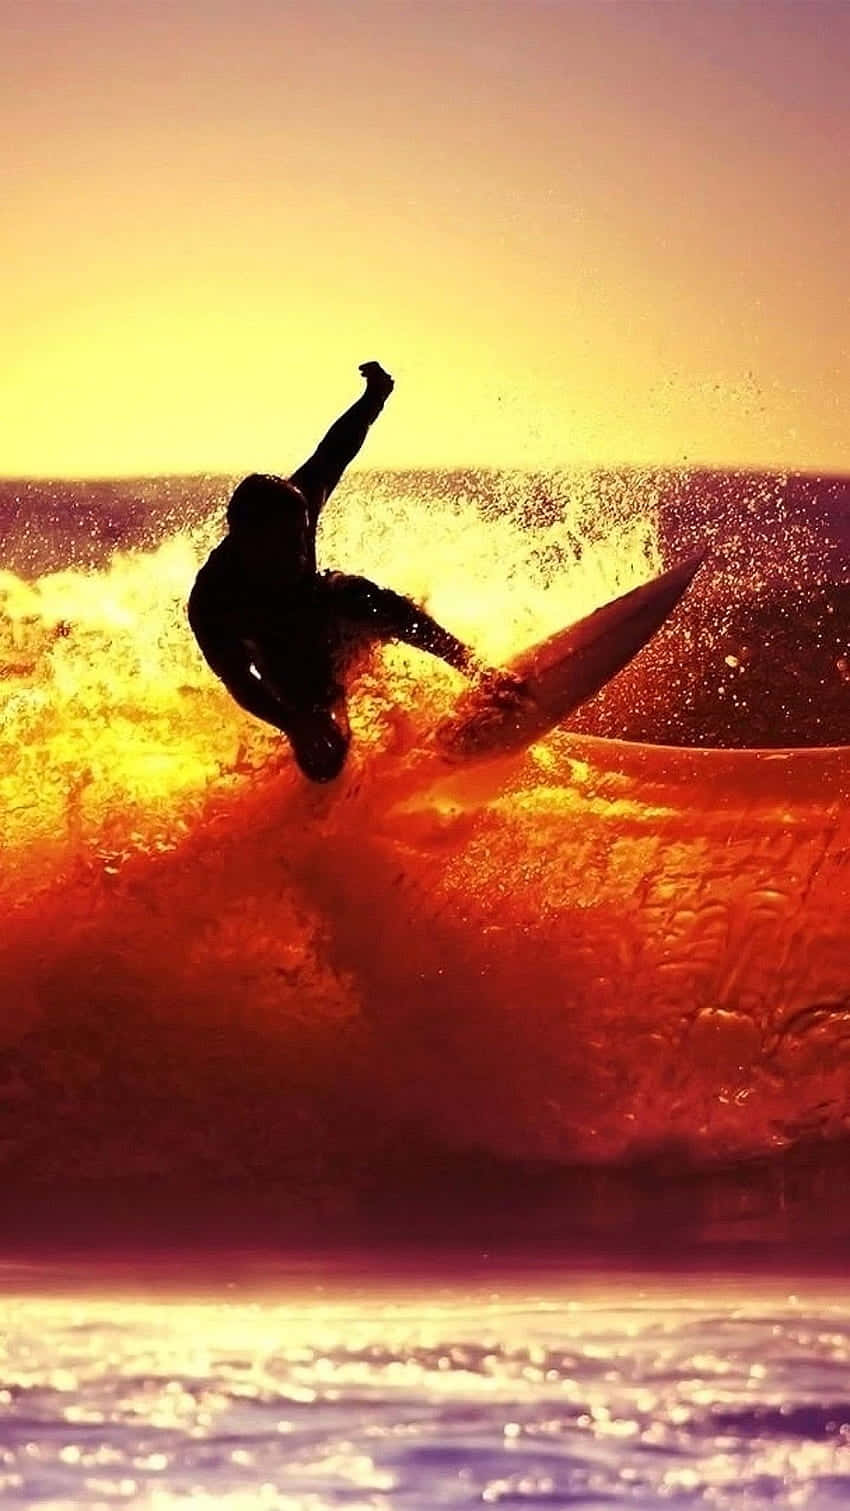 "Feeling the thrill of surfing with an iPhone in hand." Wallpaper